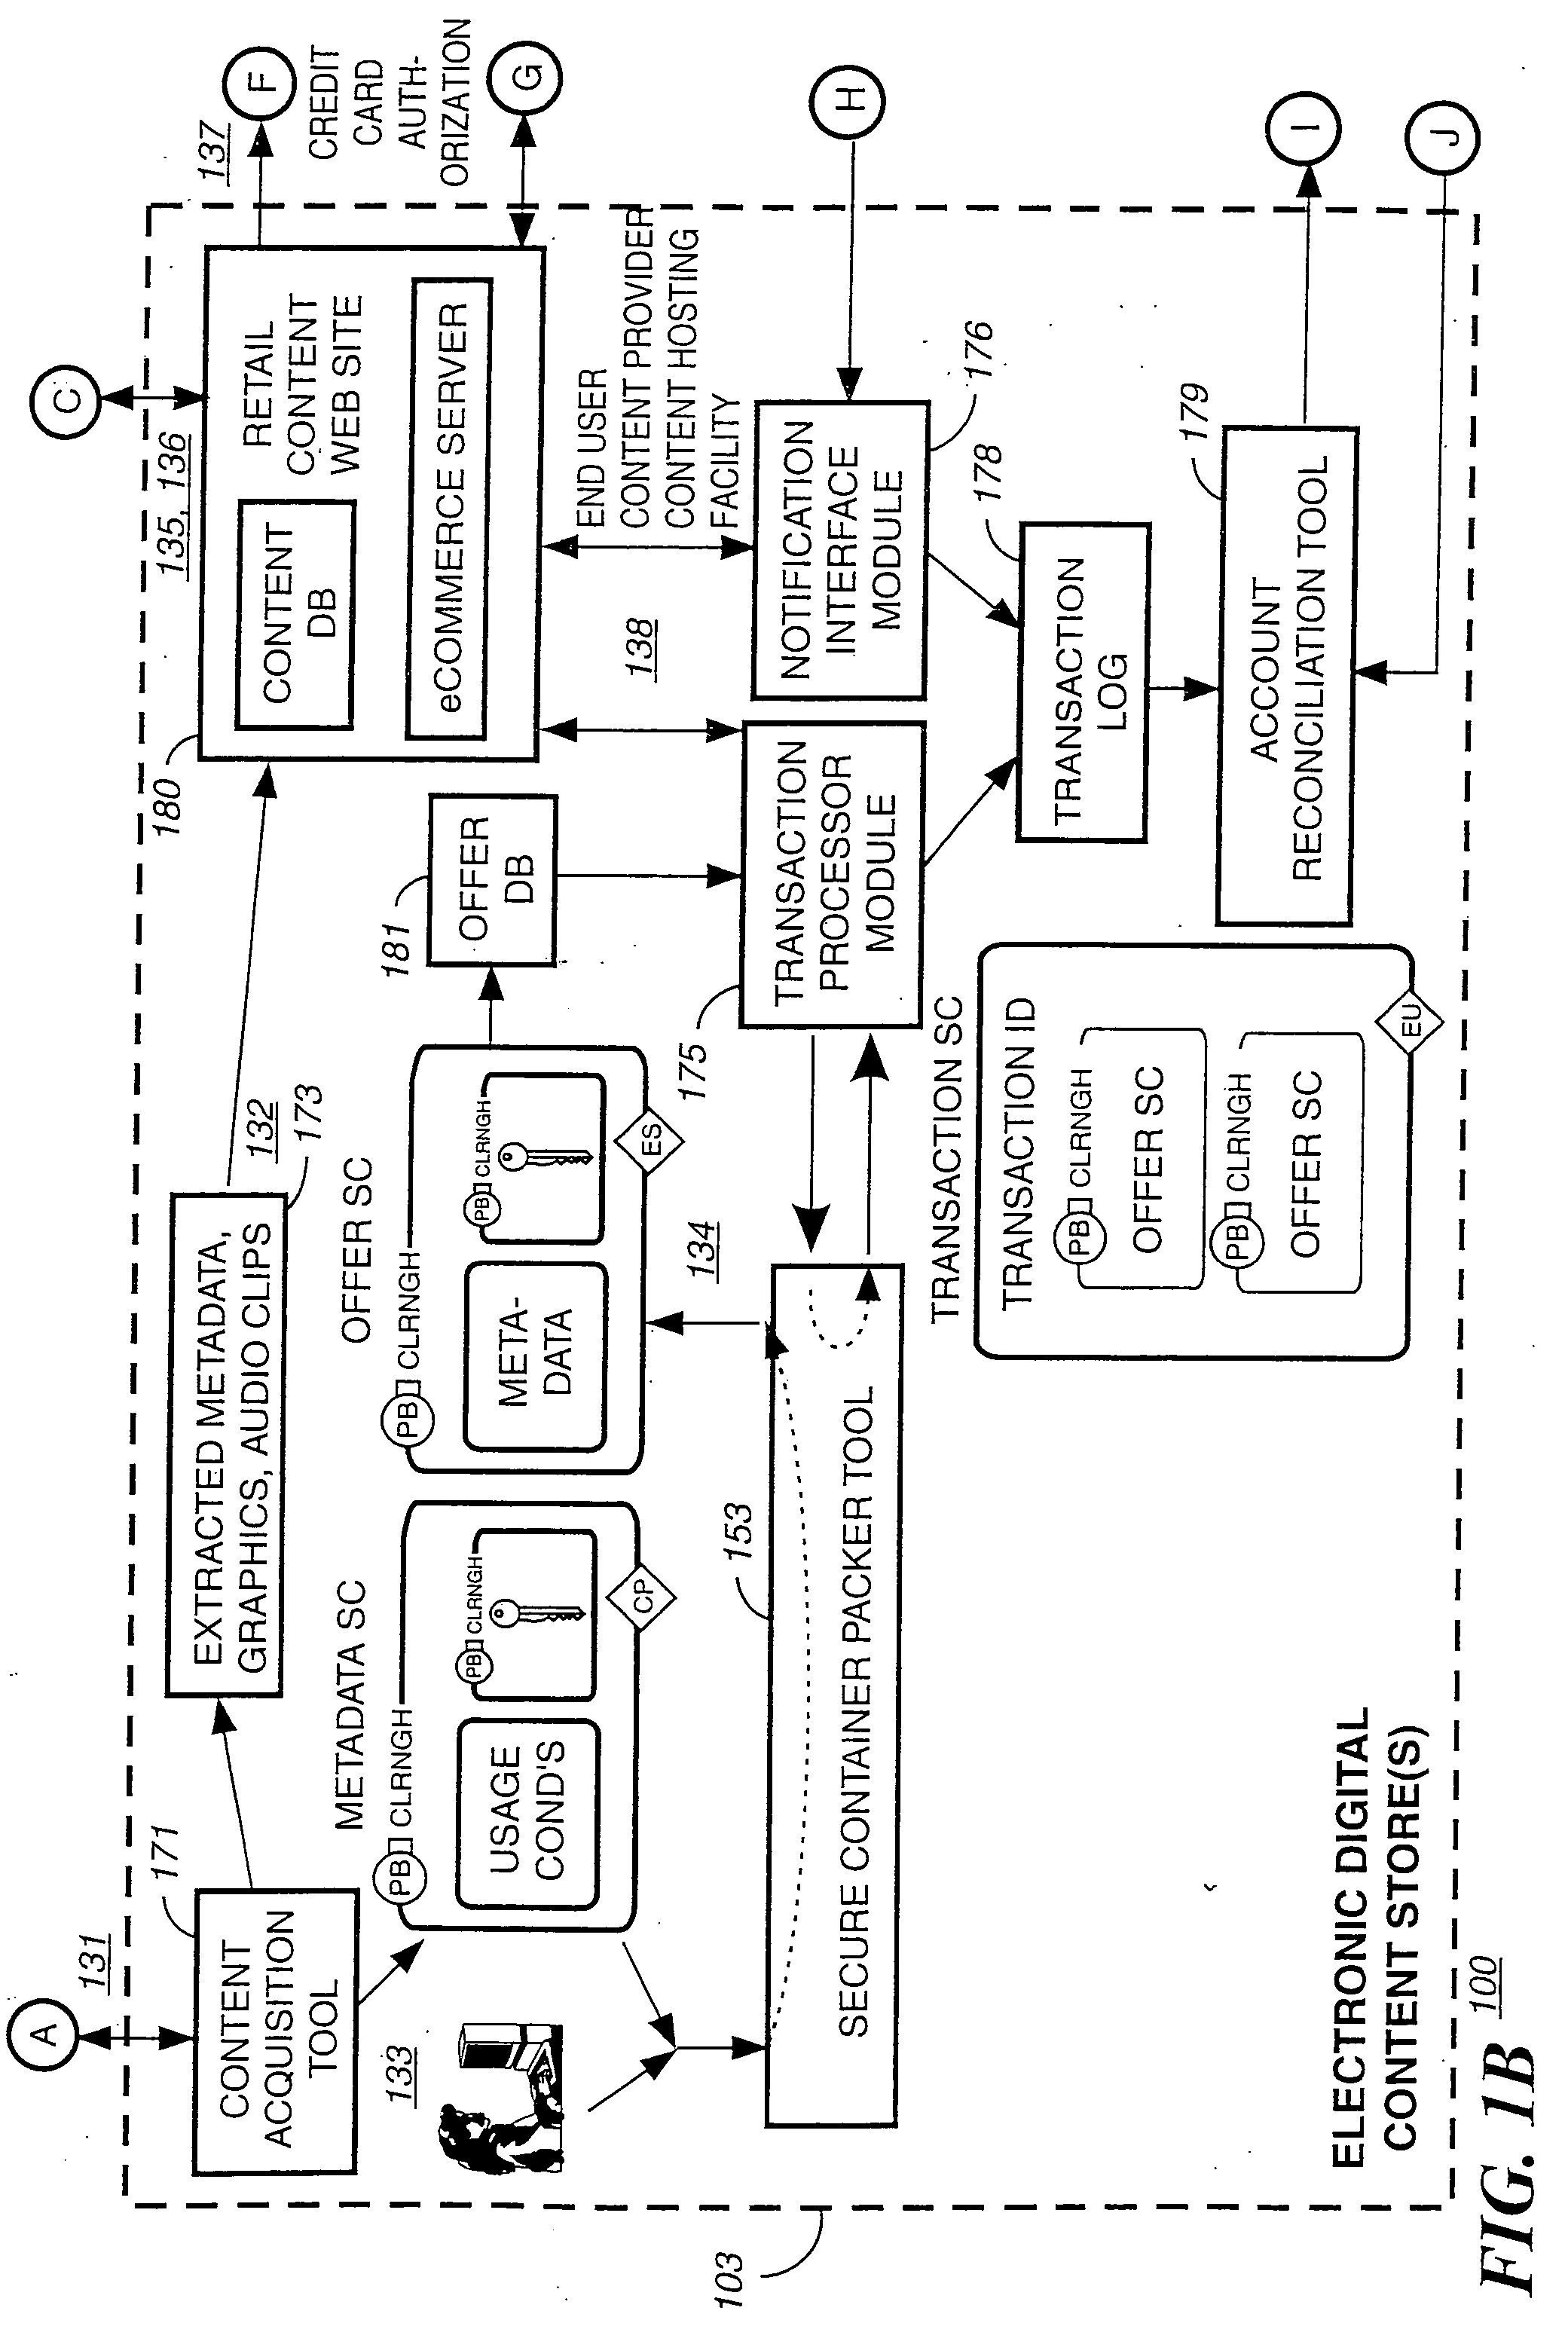 Method and system for preventing unauthorized rerecording of multimedia content